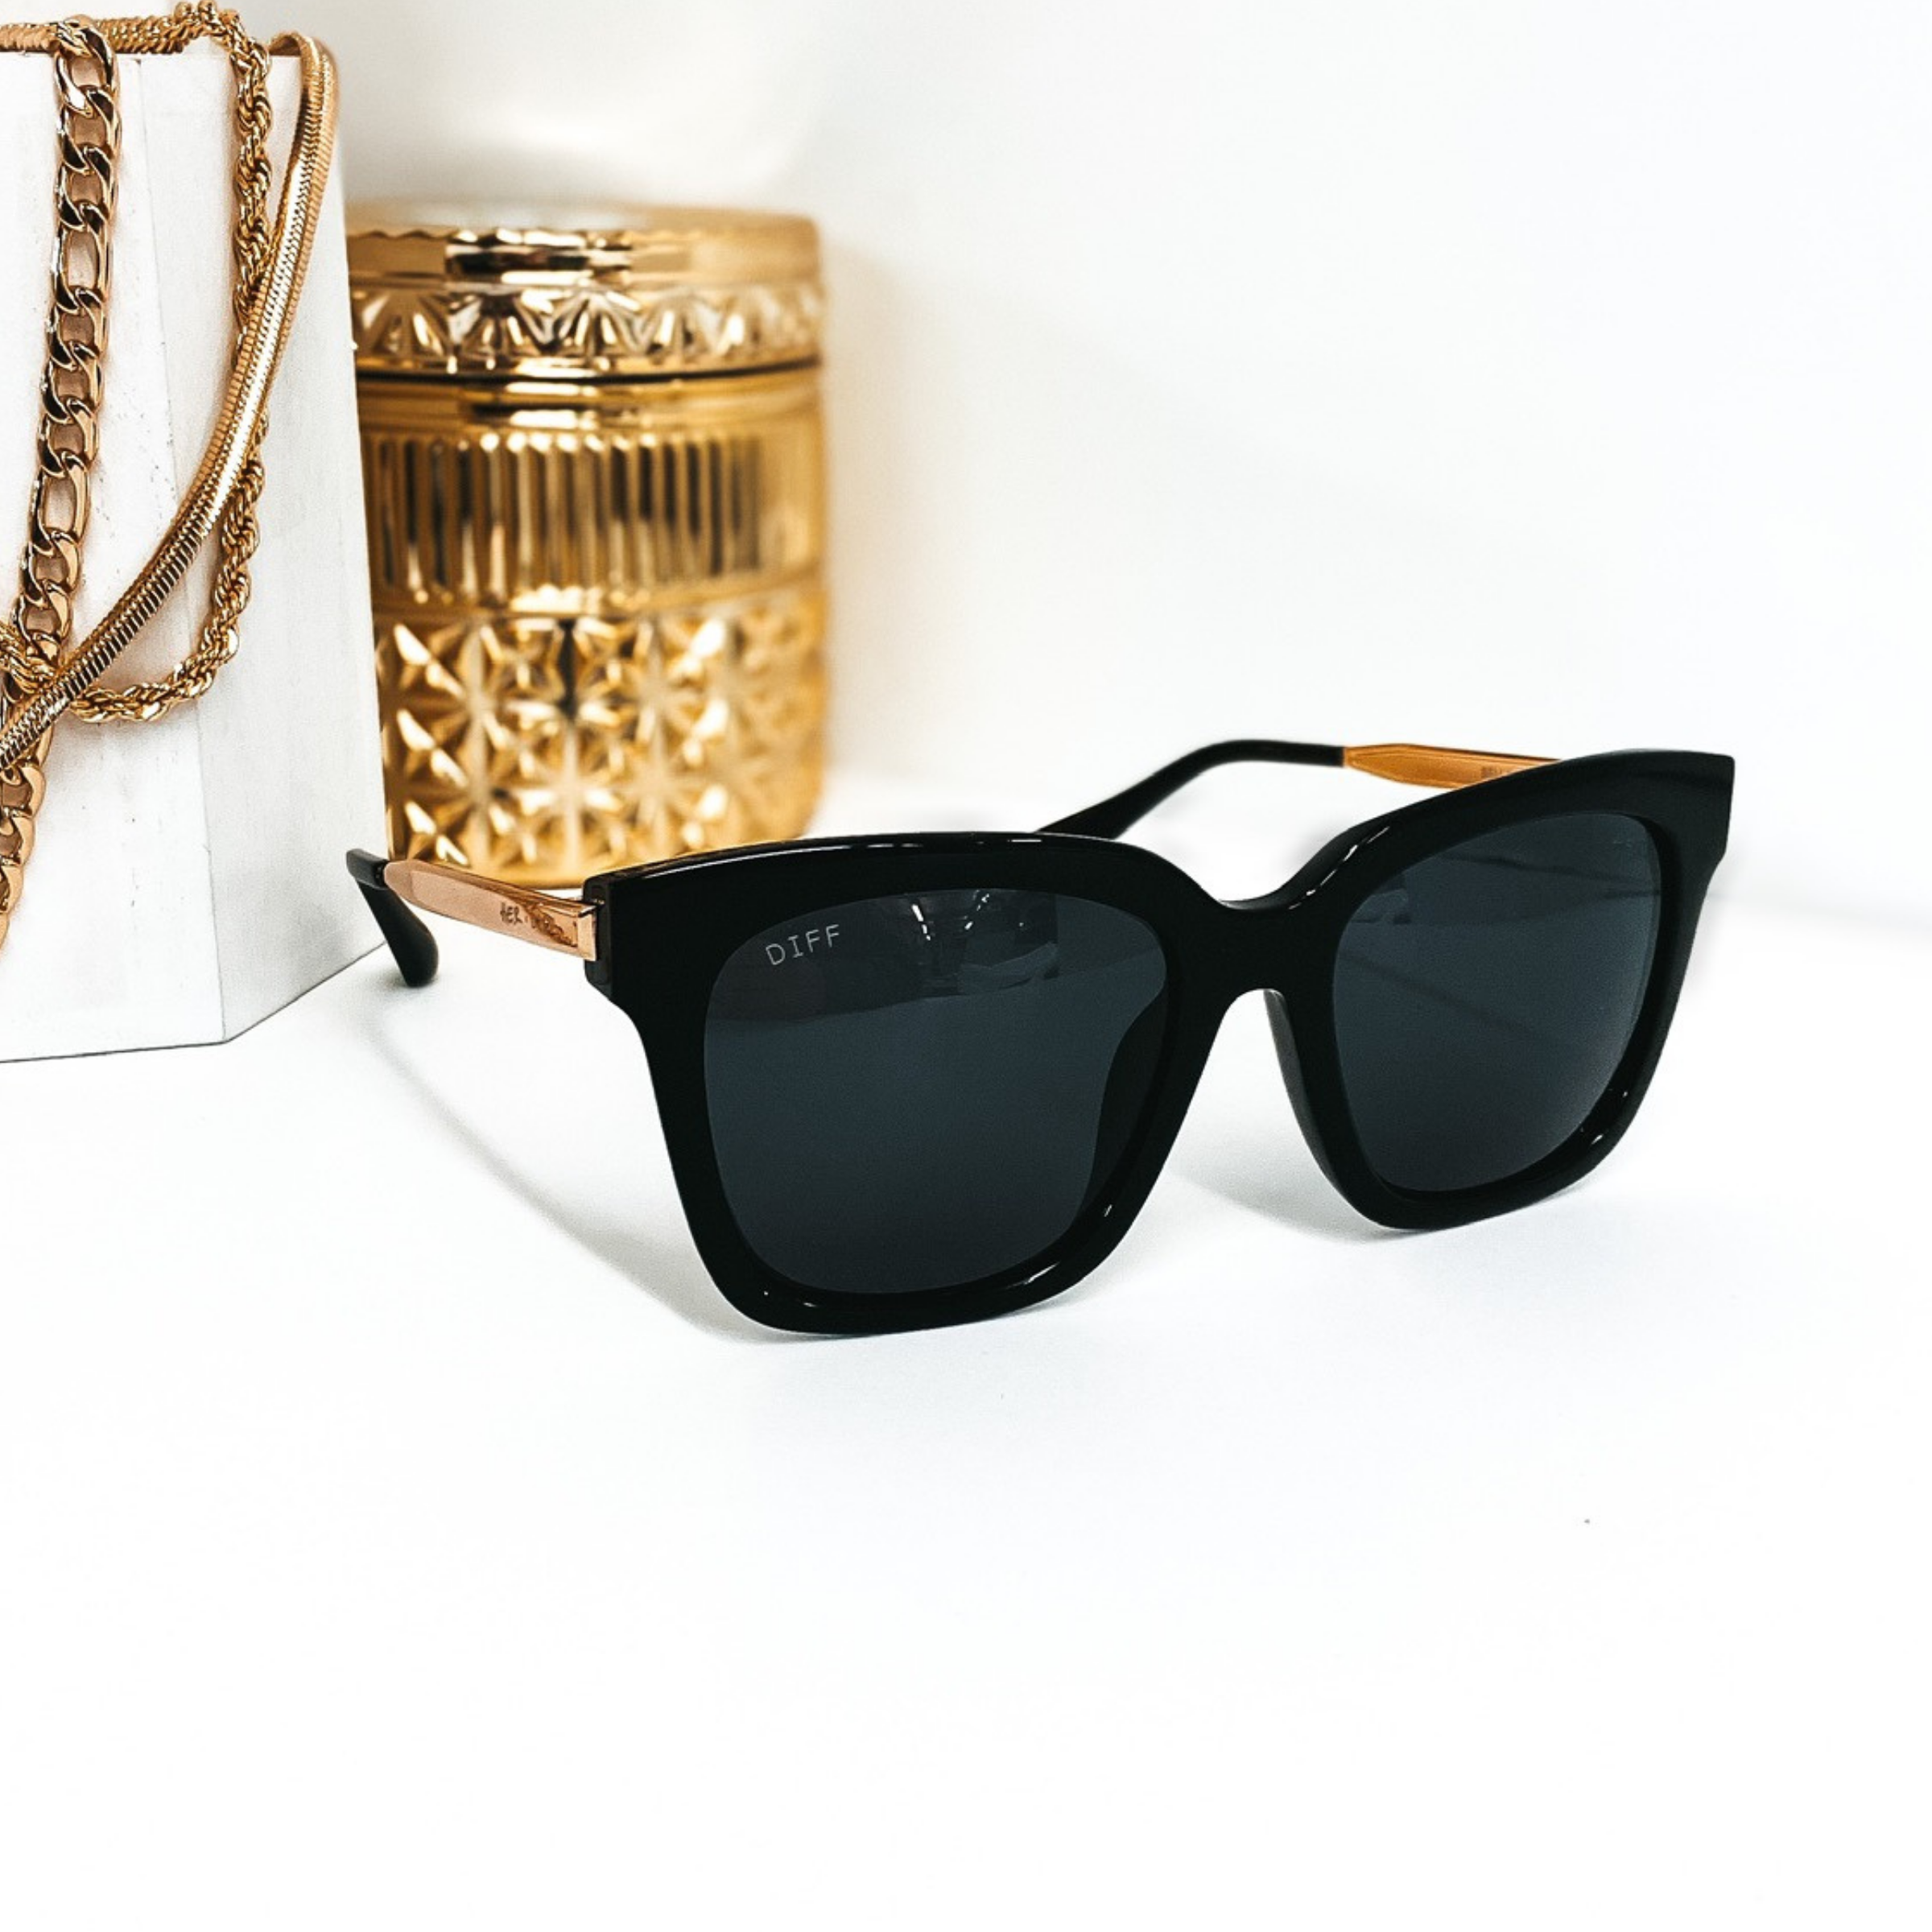 DIFF x H.E.R. | Bella Black Lens Sunglasses in Black and Gold - Giddy Up Glamour Boutique